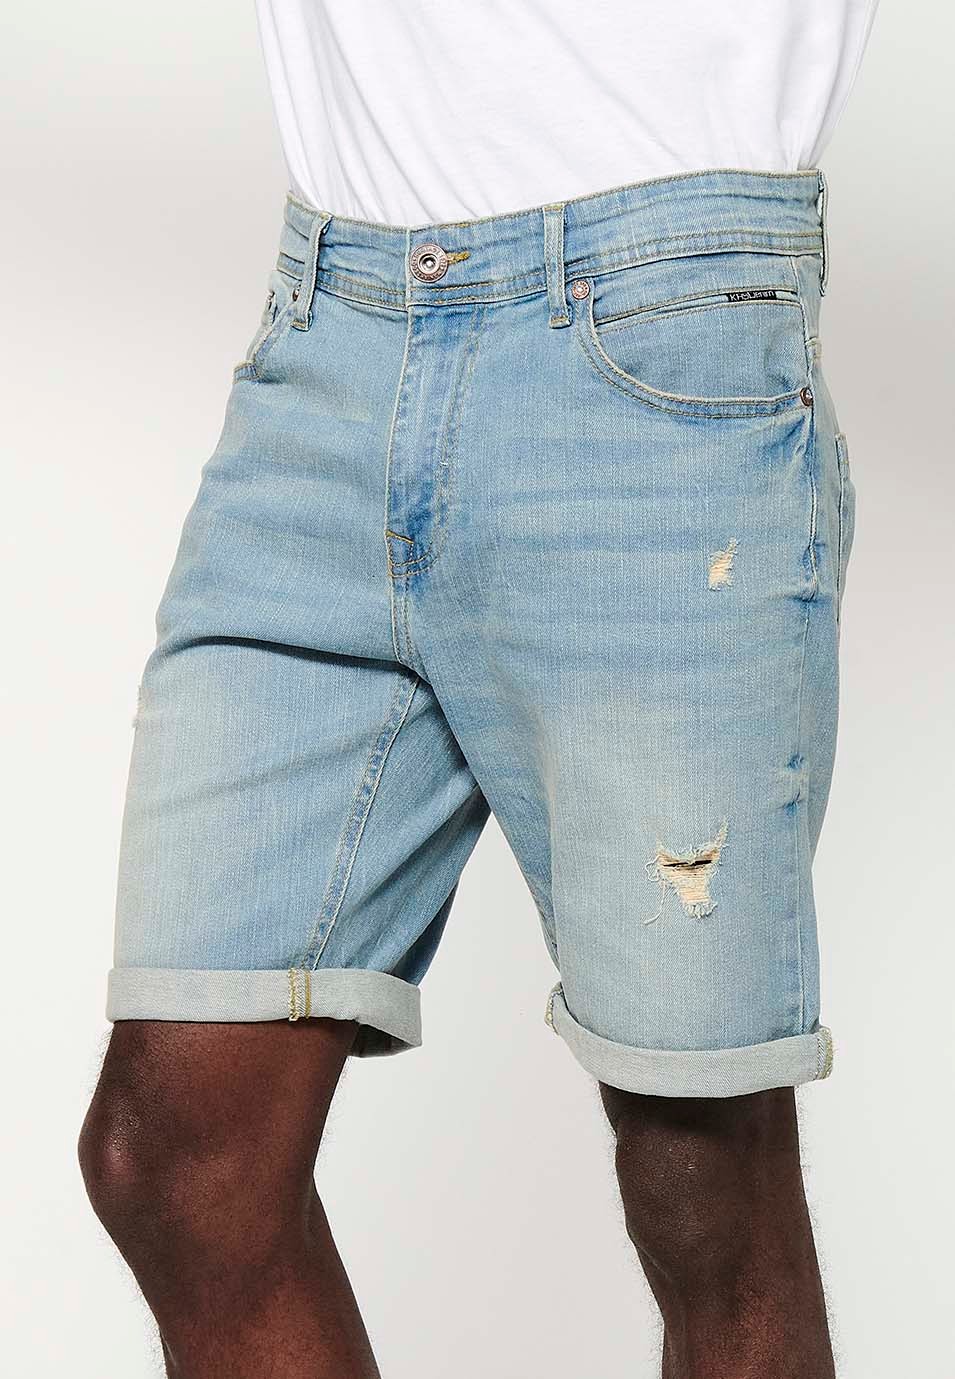 Shorts with turn-up finish and front closure with zipper and button and five pockets, one blue pocket pocket for men 7